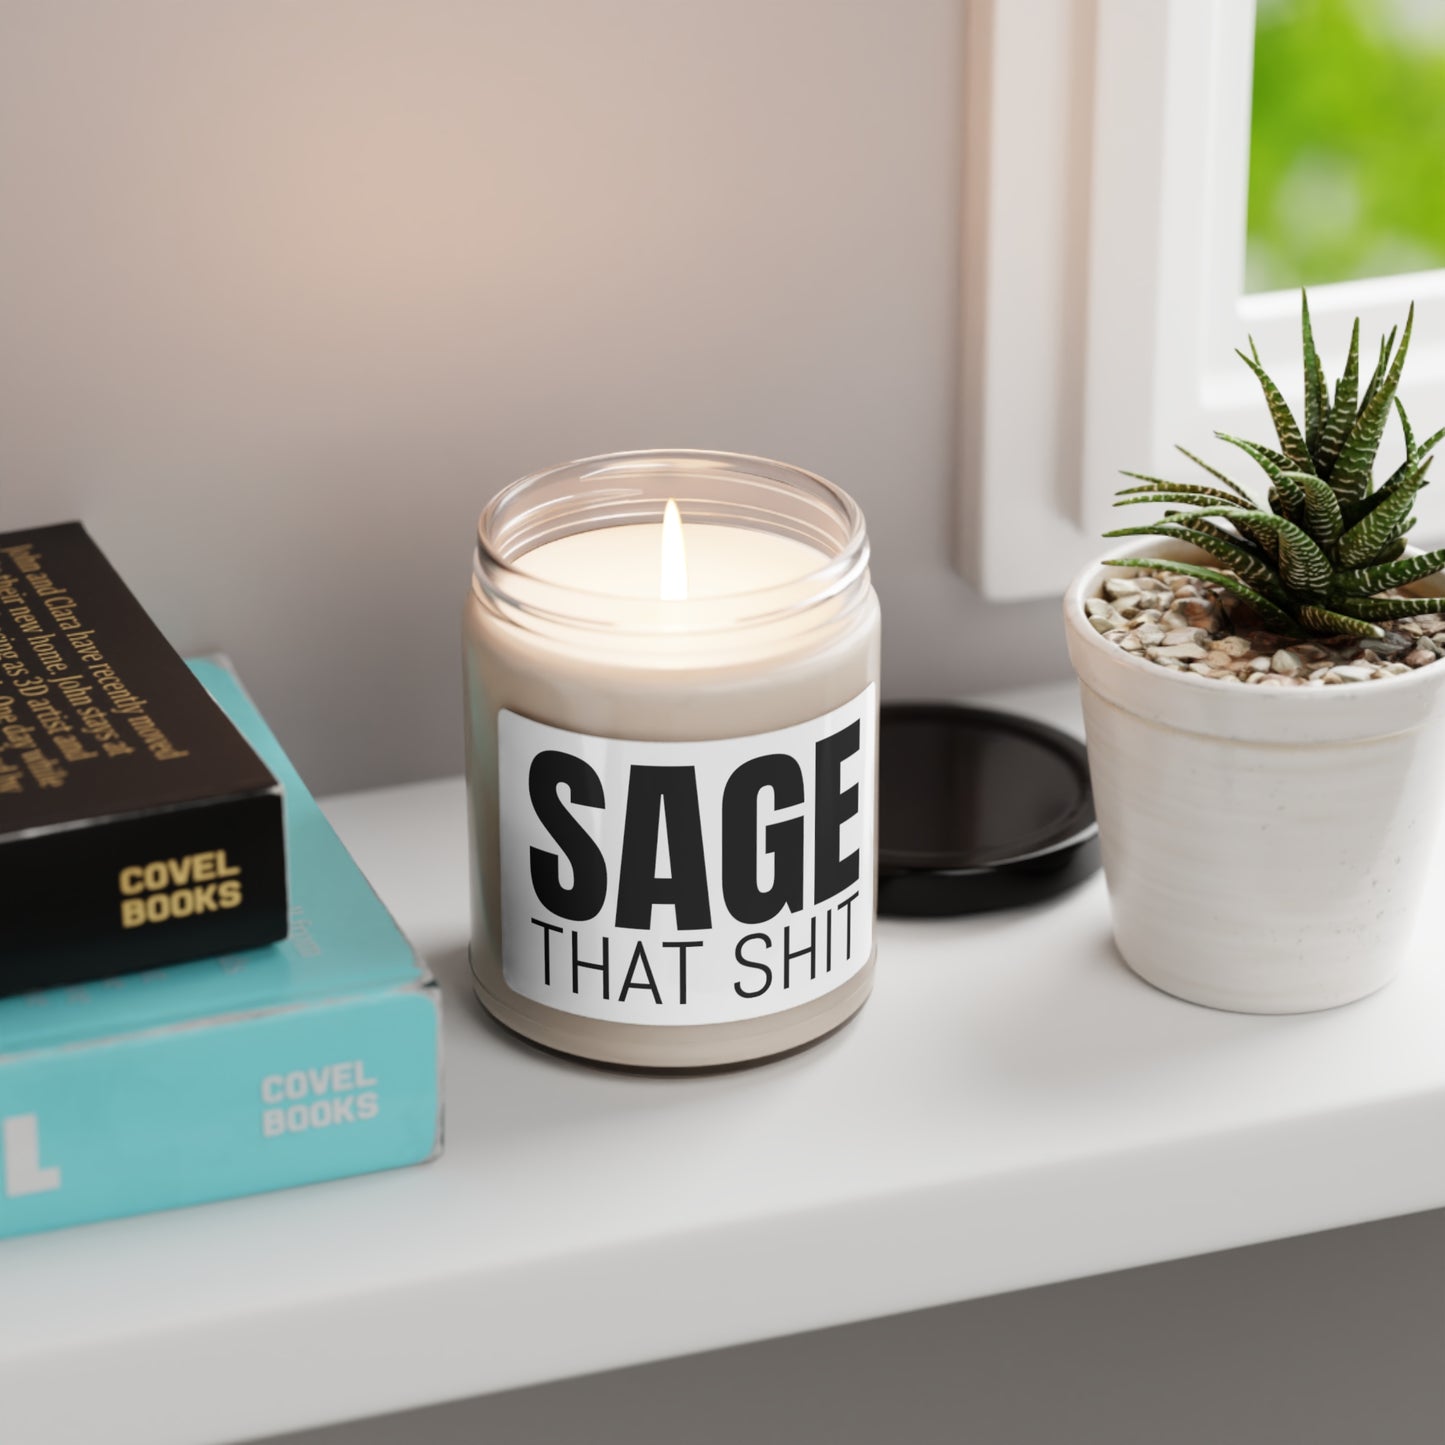 Sage That S--- | White Sage and Lavender Scented Soy Candle, 9oz